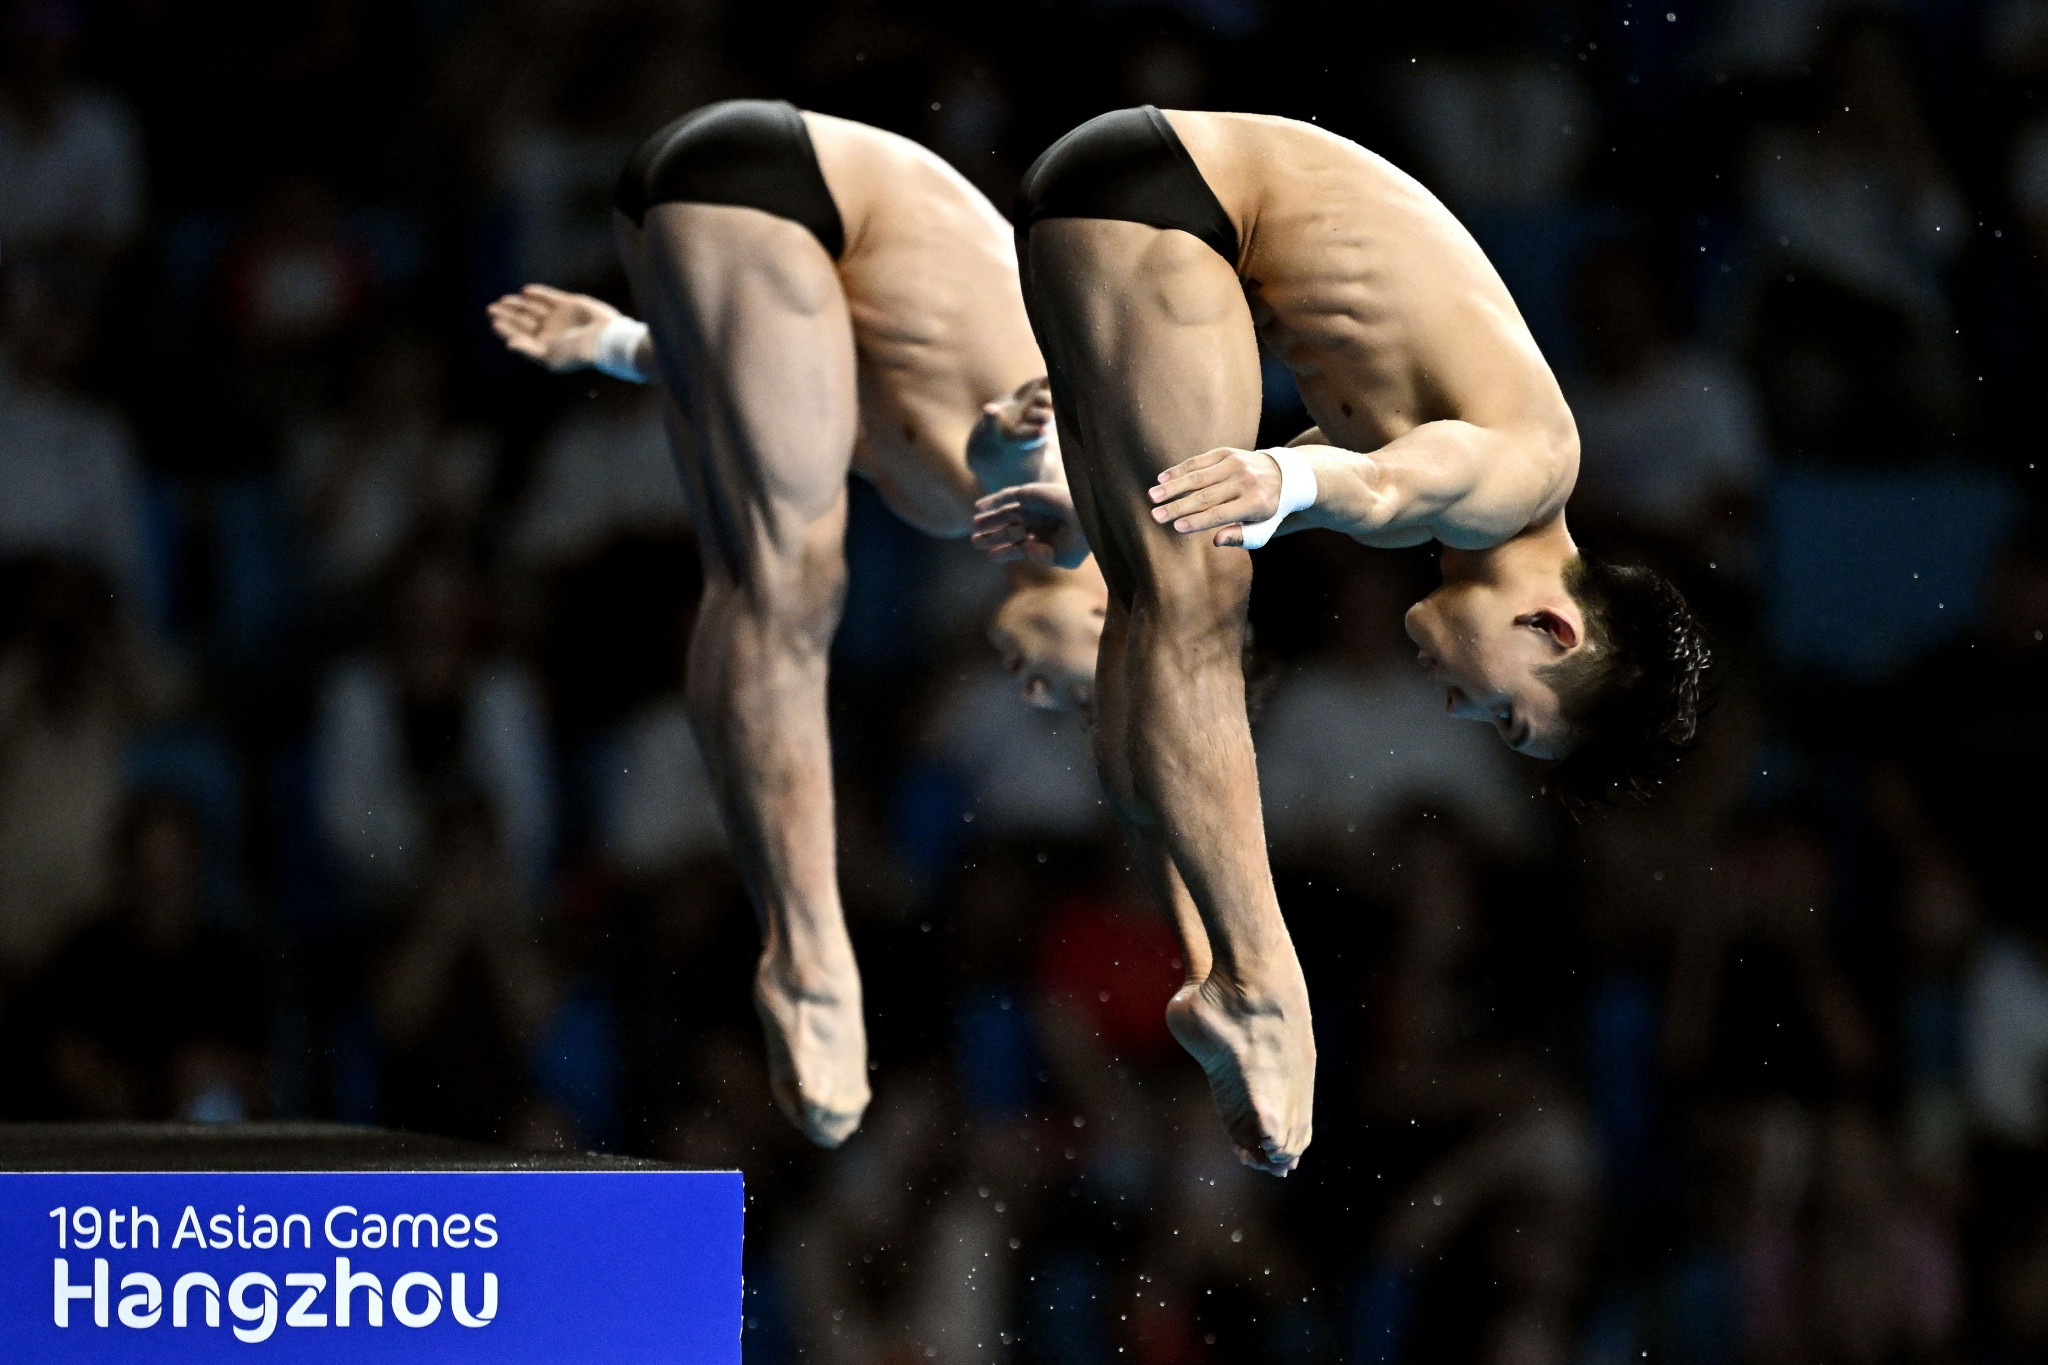 Yang Hao, left, and Lian Junjie, right, emerged victorious from the men's 10m synchronised platform final after a brilliant performance ©Getty Images